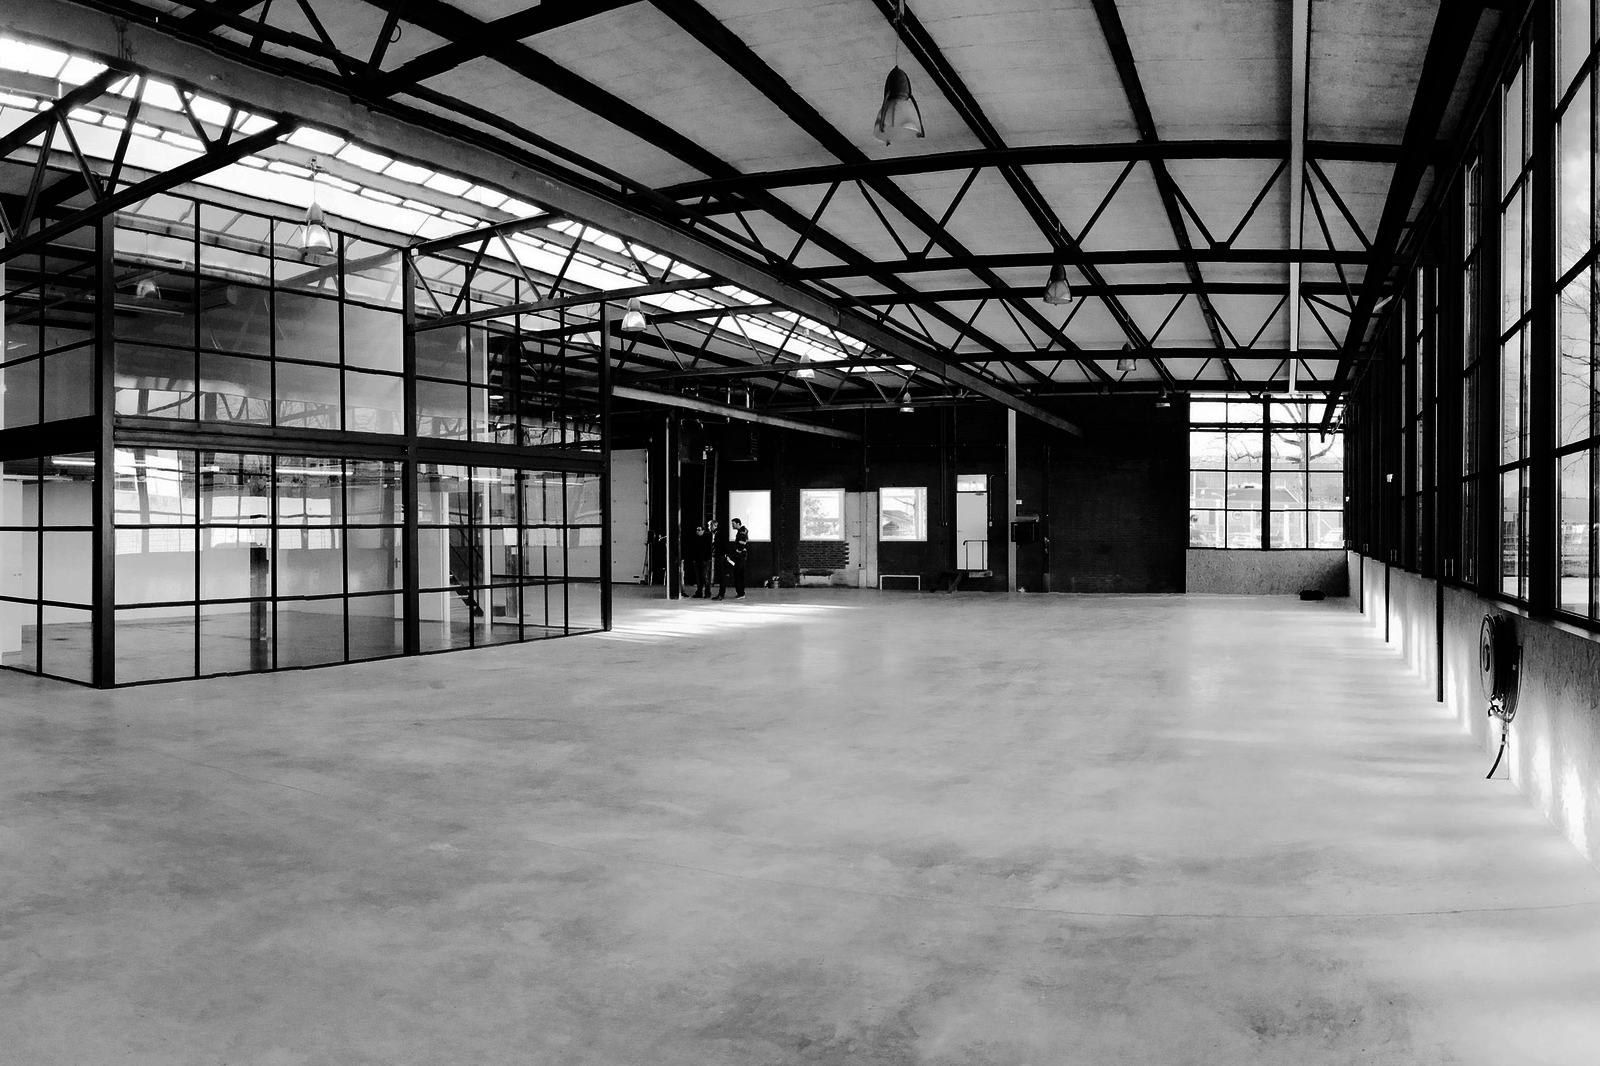 To meet growing demand FFWD Wheels looked for a new location with more capacity and storage facilities. – Photo FFWD Wheels